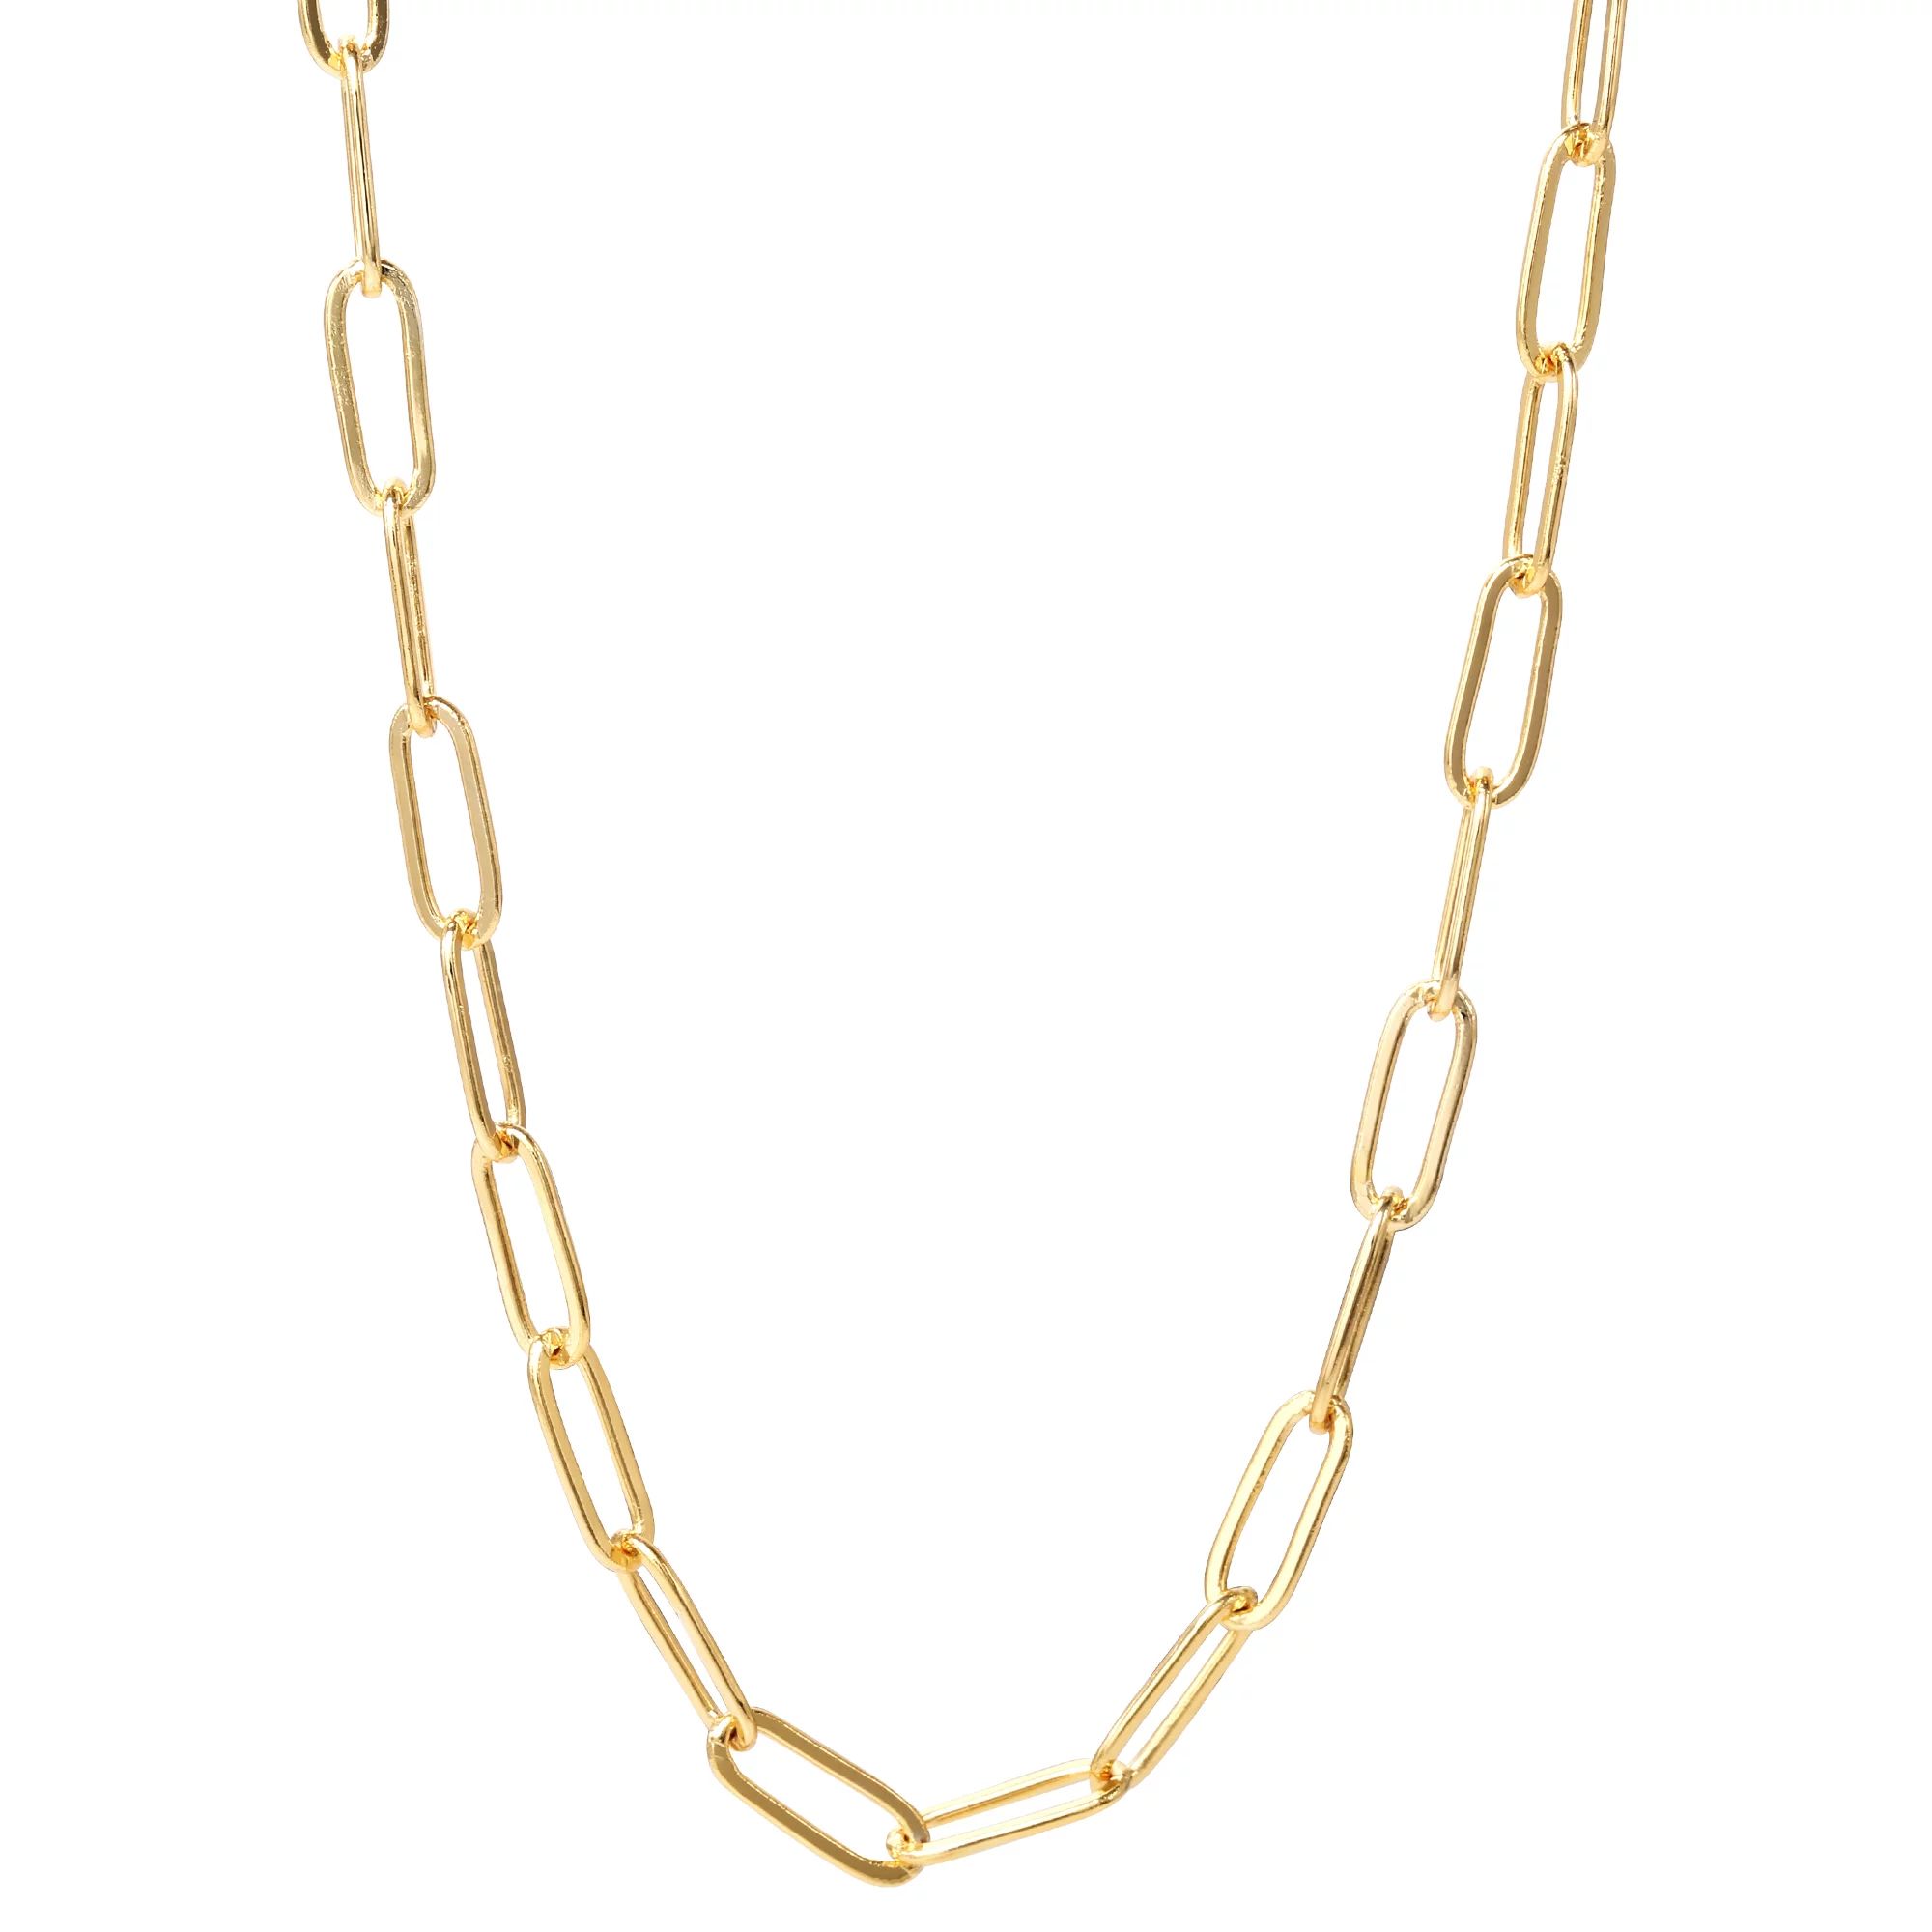 Believe by Brilliance 14kt Gold Flash Plated Paperclip Chain Necklace, 18" + 2" | Walmart (US)